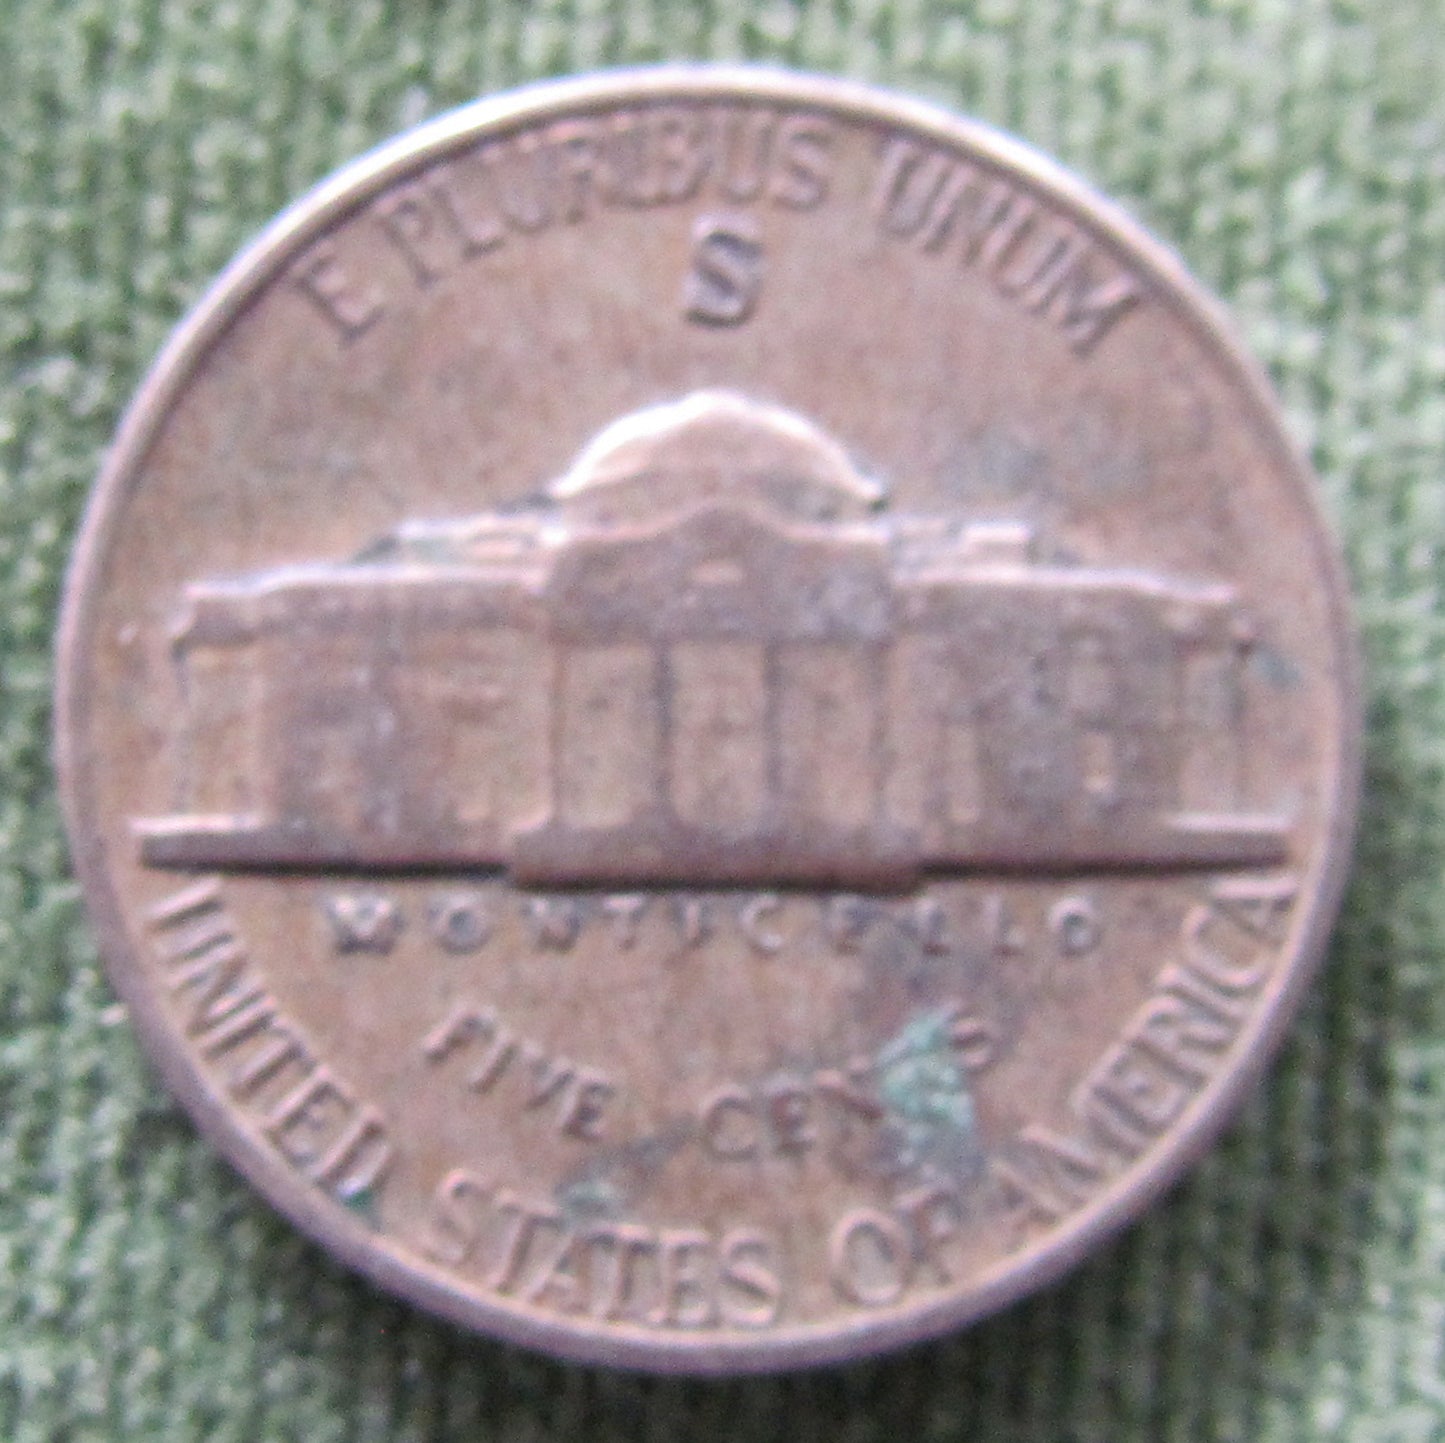 USA American 1943 S Nickel Jefferson Coin - Circulated